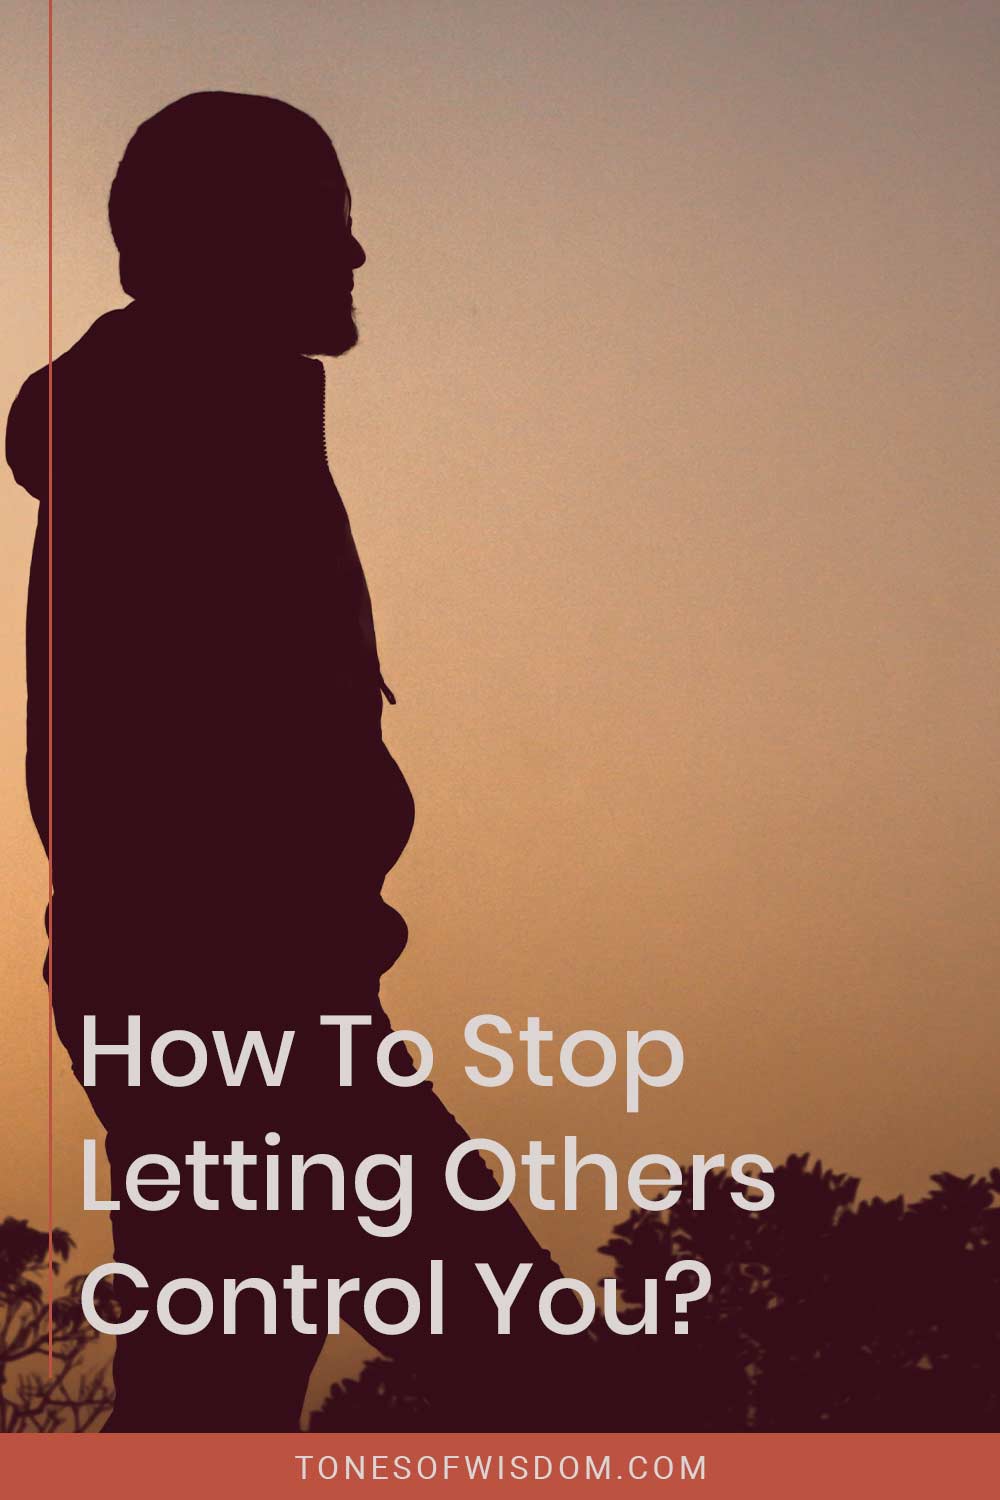 How To Stop Letting Others Control You?